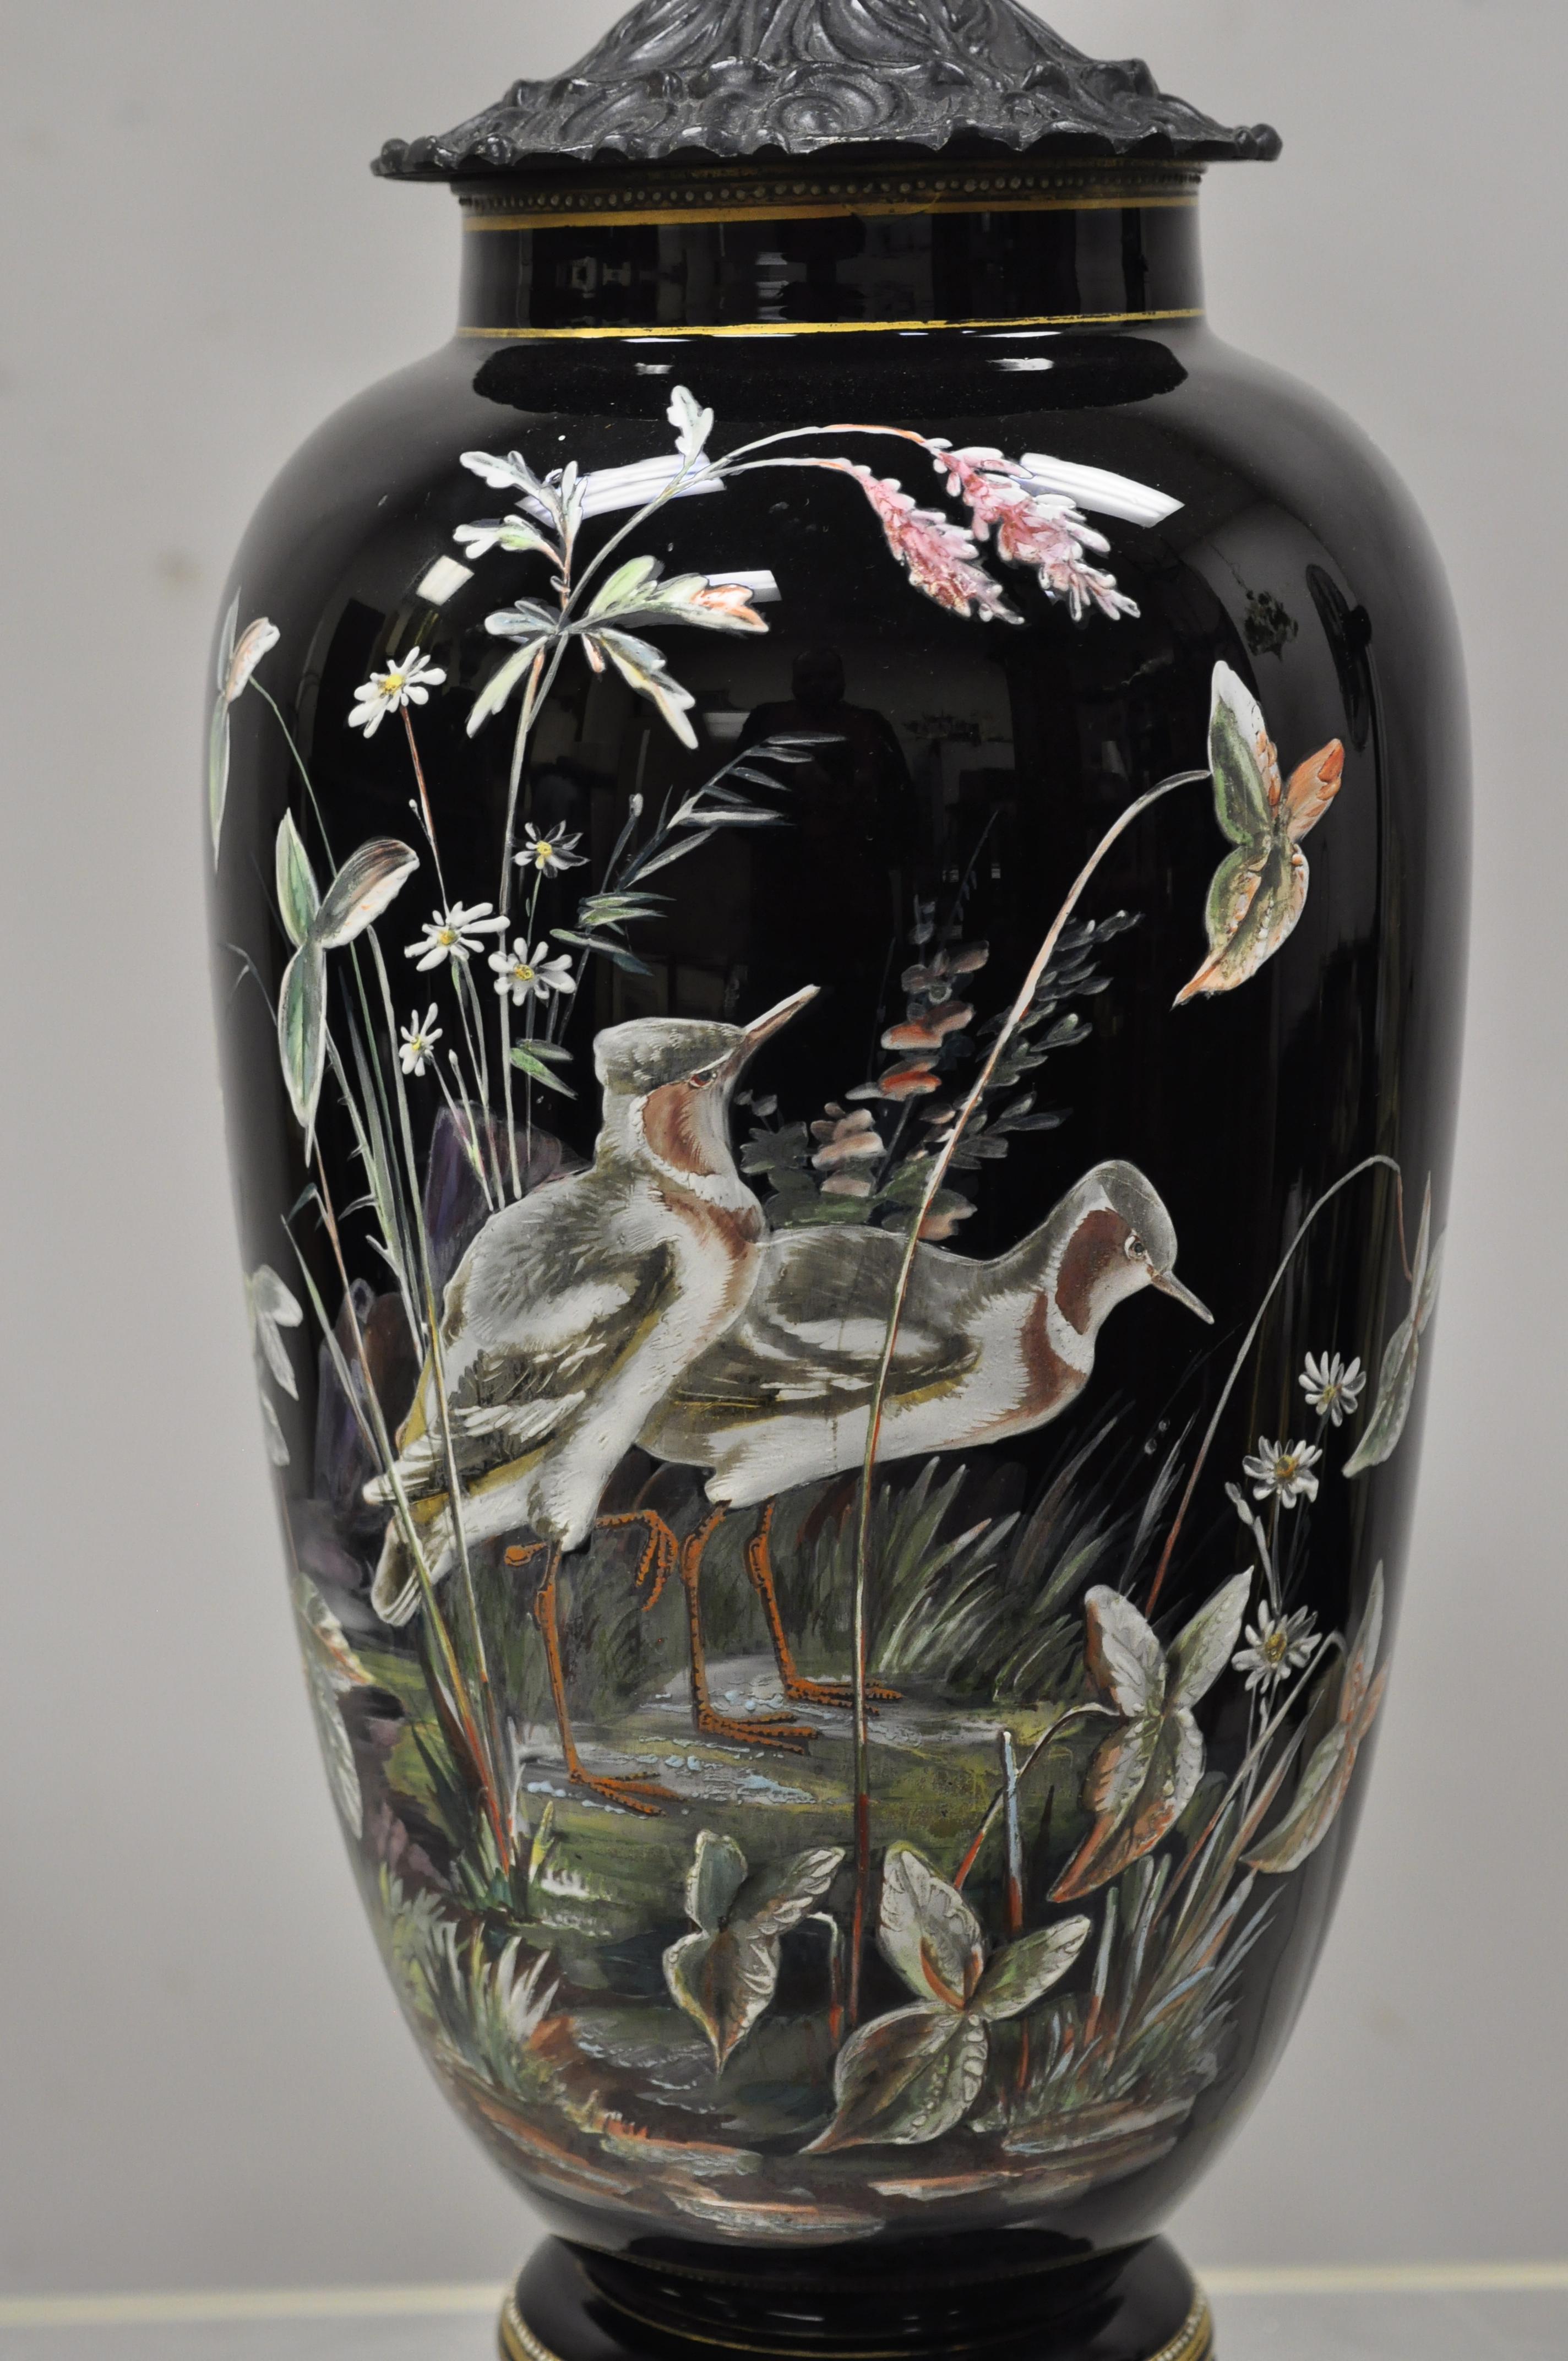 Antique Chinese chinoiserie porcelain ceramic black jardinière bird painted table lamp. Item features solid floral carved wood base, porcelain/ceramic body with hand painted scenes of birds and plants, very nice antique item, great style and form,